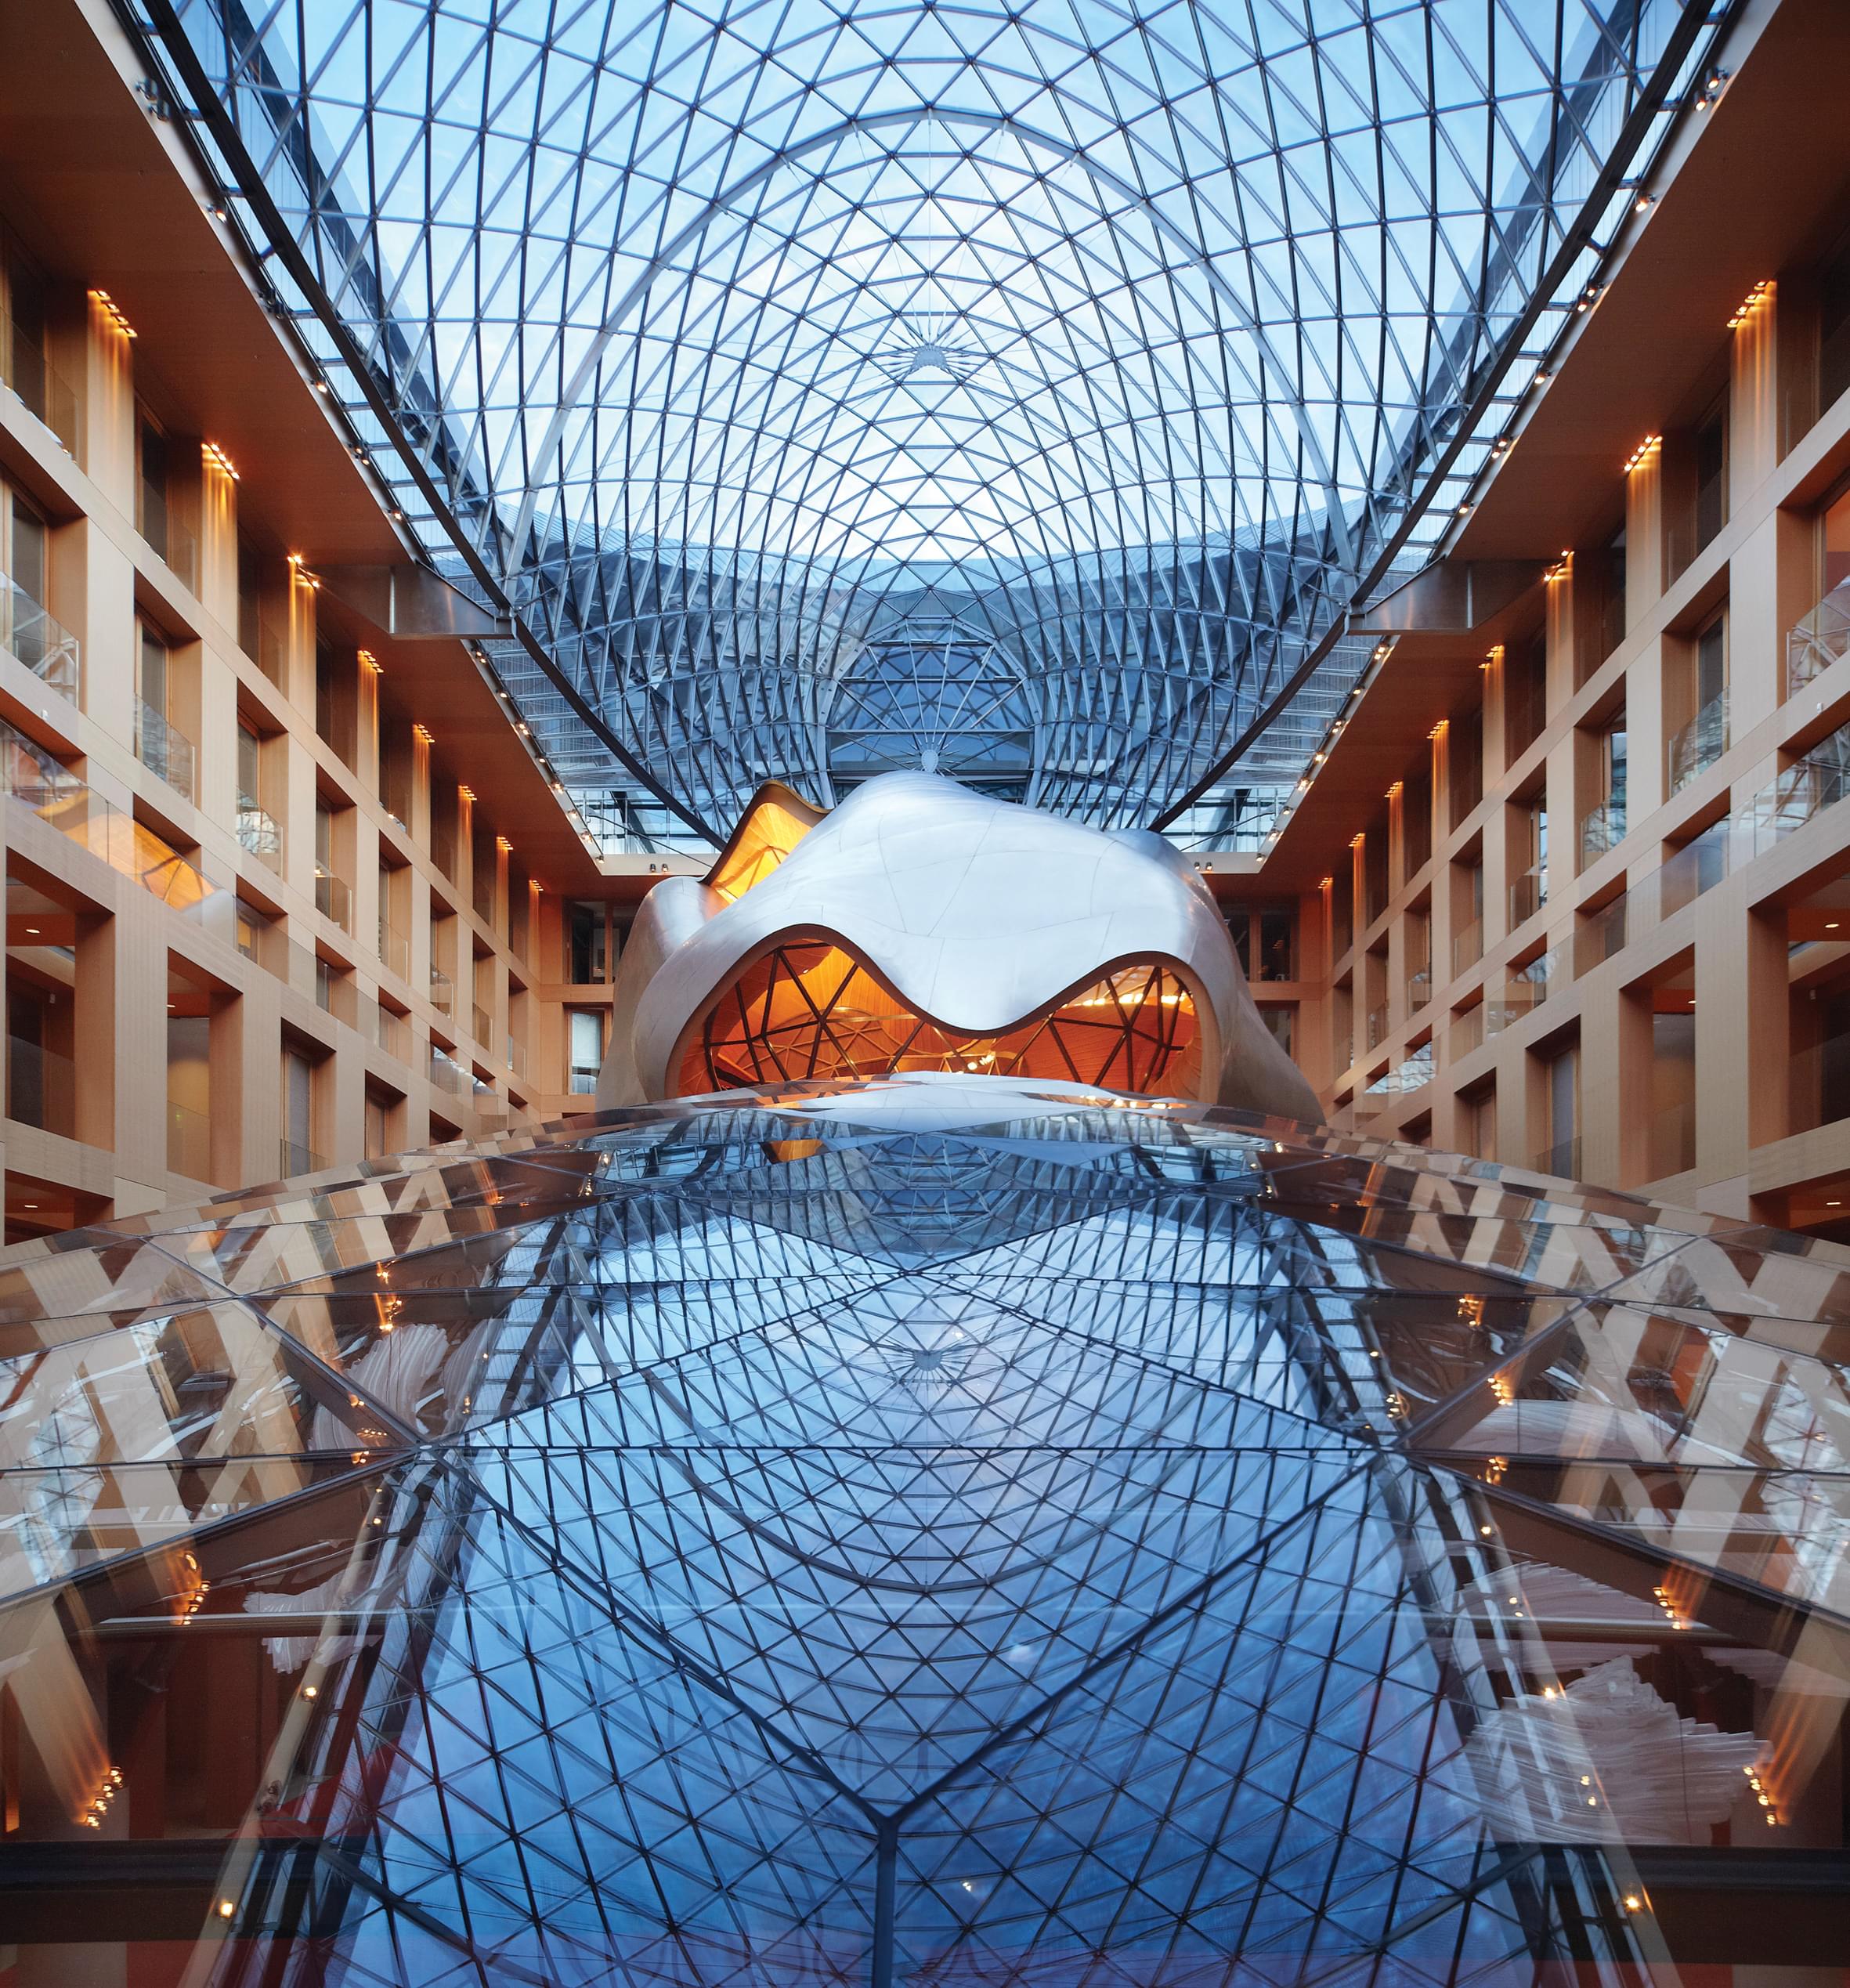 View into the atrium of the DZ BANK building: An inner courtyard emerges, surrounded by offices with pine wood façade and windows, above a vaulted glass roof and a steel sculpture in the centre of the courtyard. The vaulted glass roof of the basement rises in front of the sculpture.